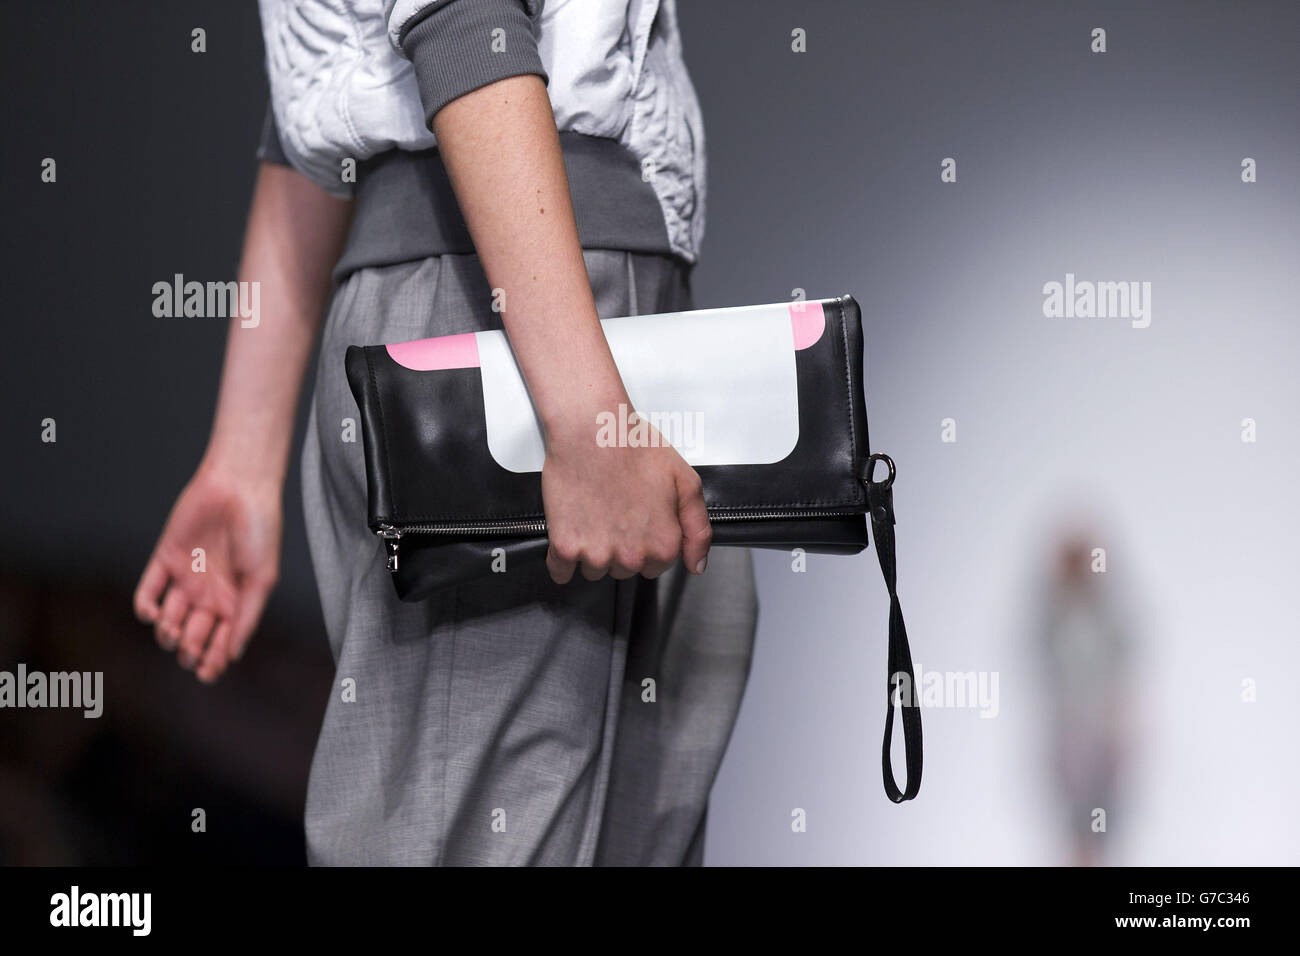 A model holds a clutch bag on the catwalk during the Christopher Raeburn catwalk show at Somerset House in London during London Fashion Week. Stock Photo